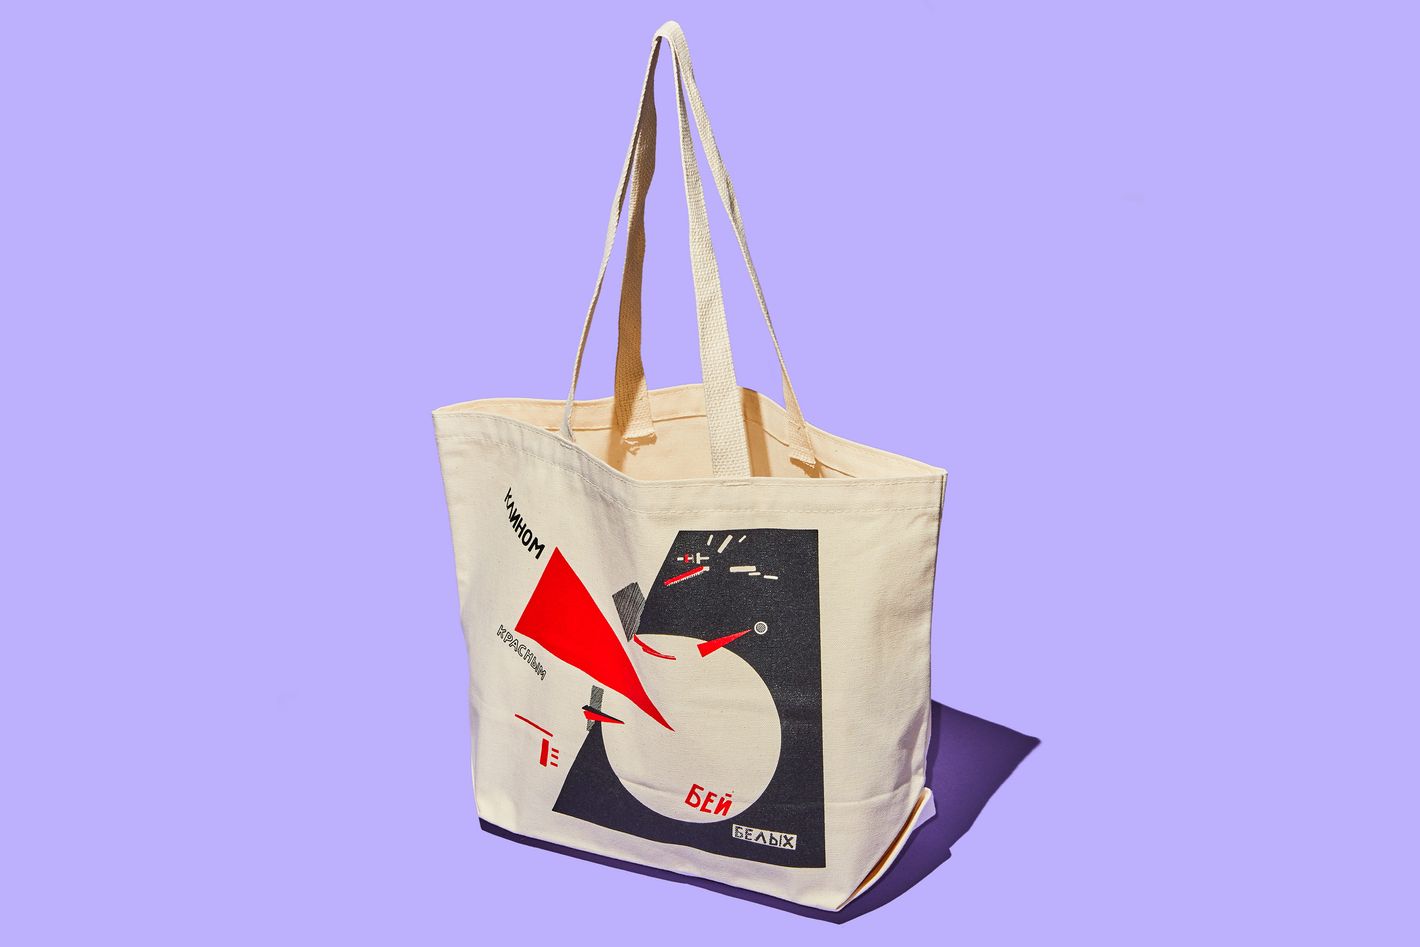 How tote bag obsession took over the world - Vox